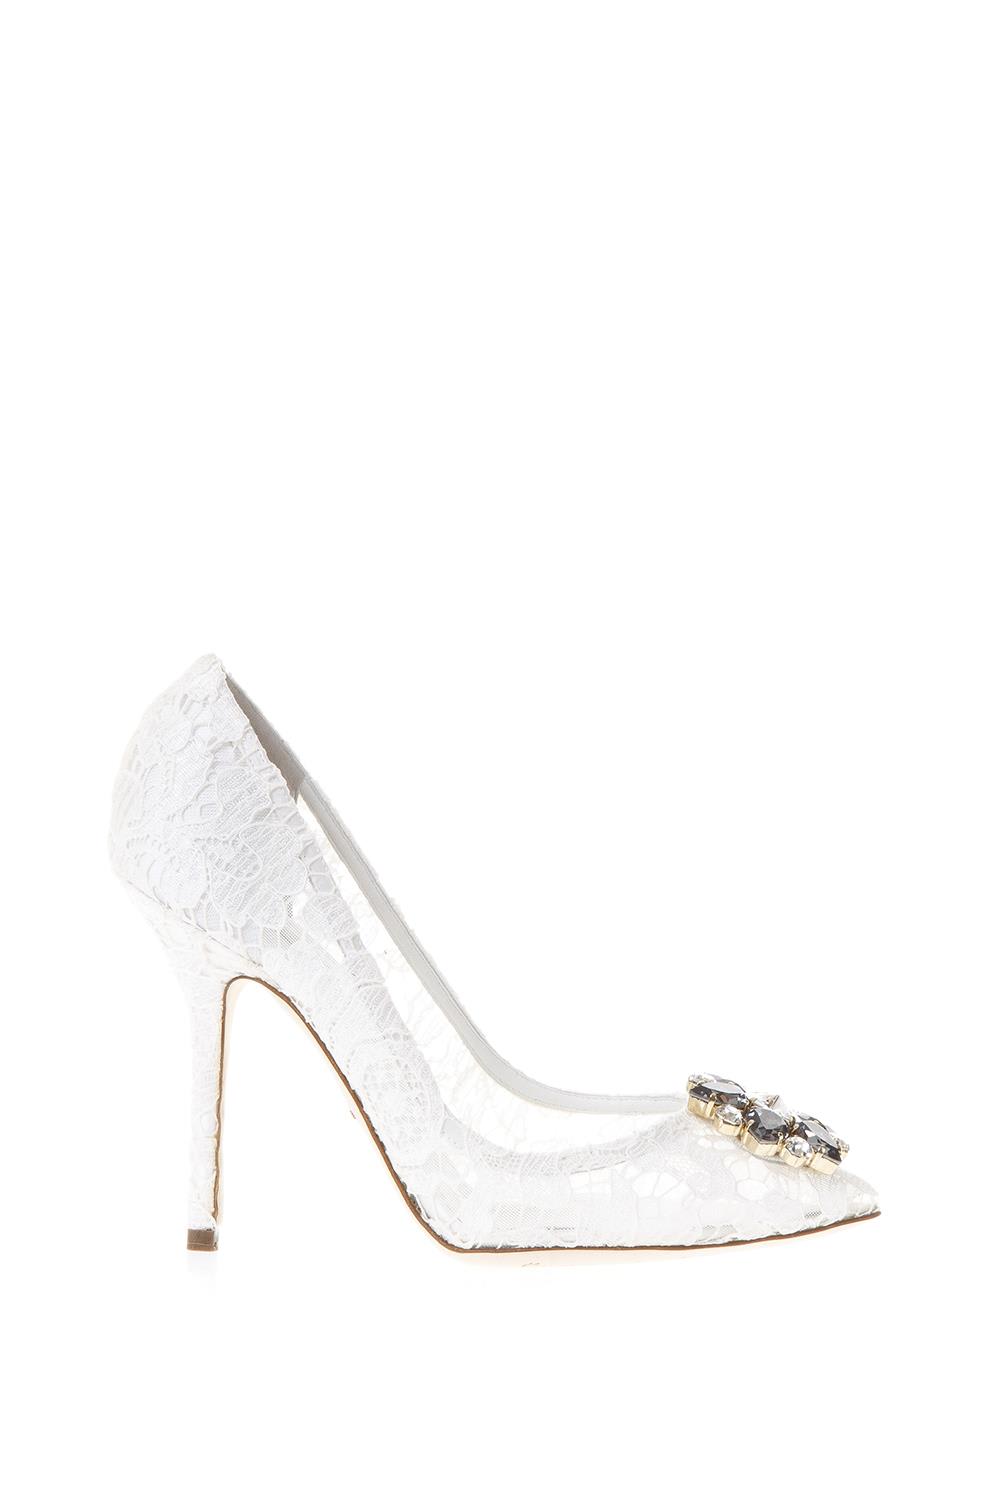 Dolce & Gabbana Taormina Lace Open Toe Court Shoes With Embroidery